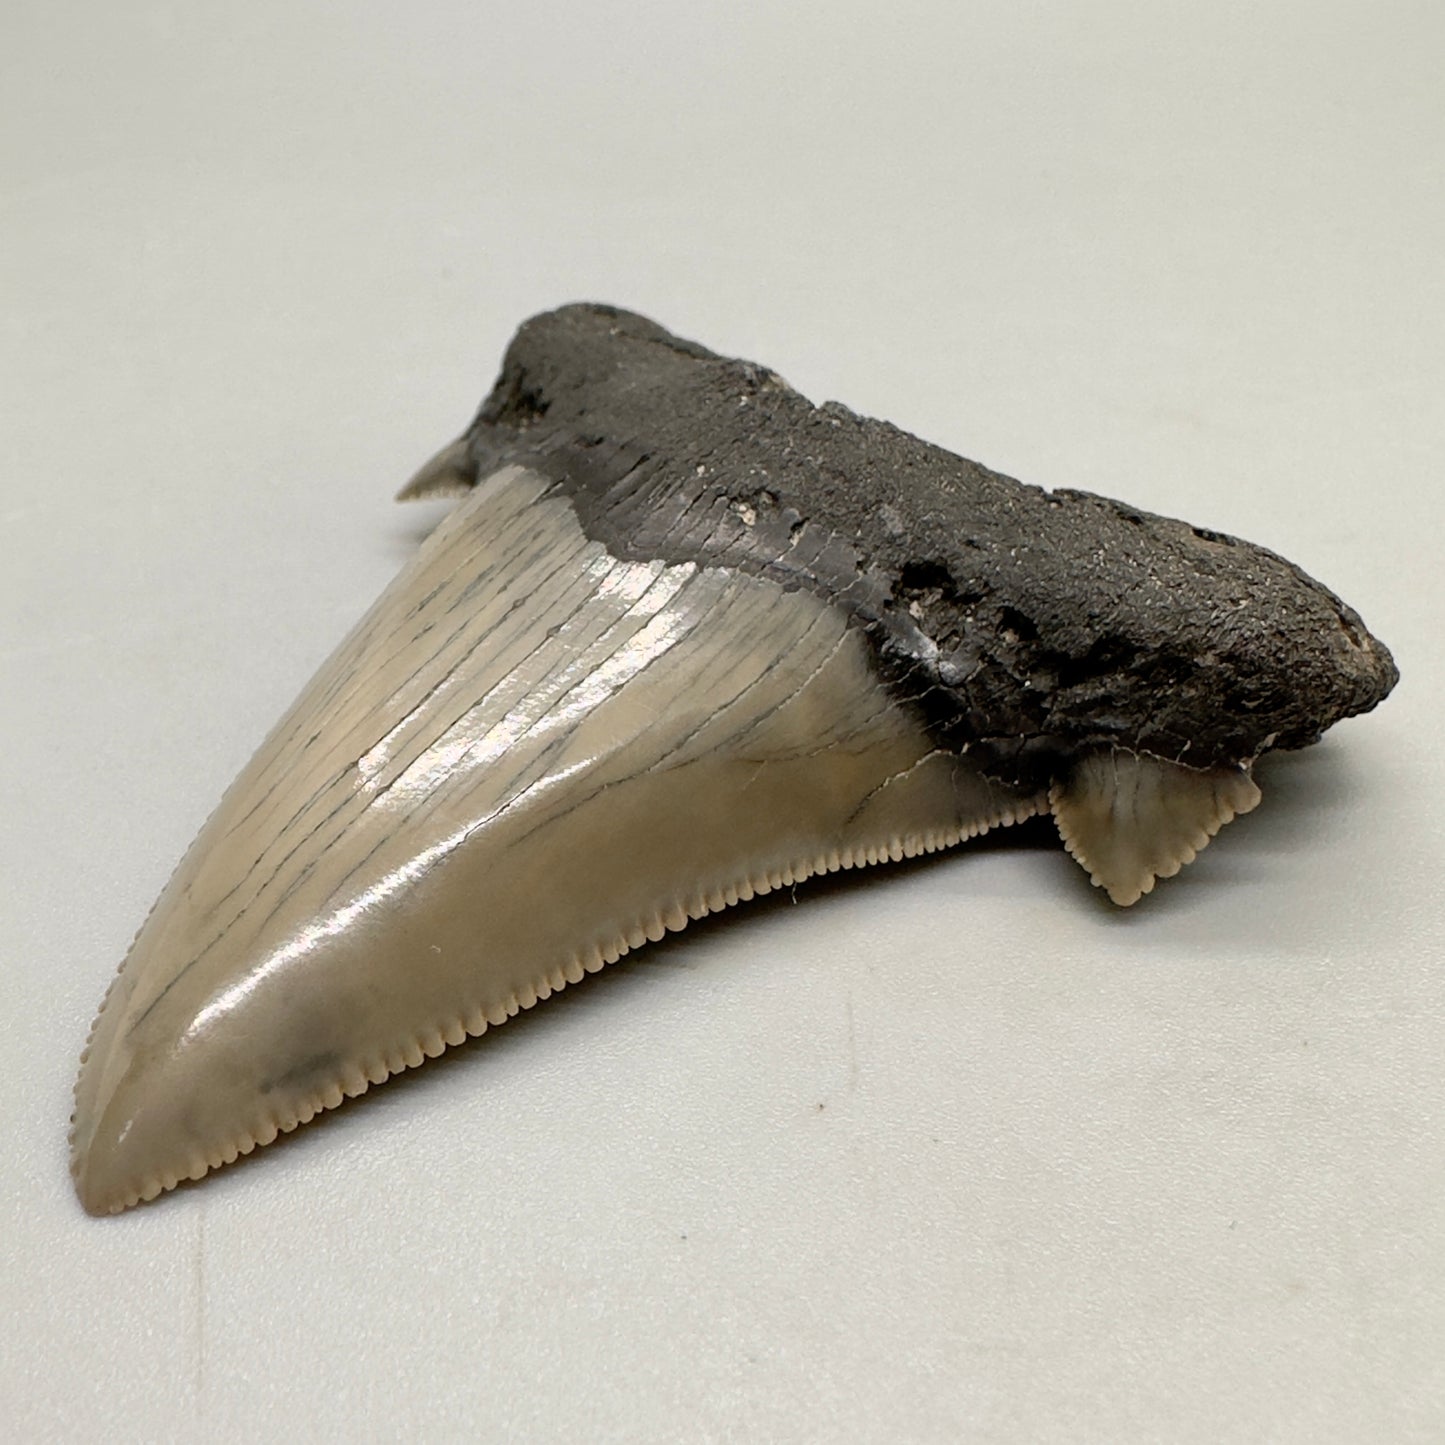 Large, sharply serrated 2.71 inches Carcharocles sokolowi (auriculatus) shark tooth from South Carolina AU366 front right